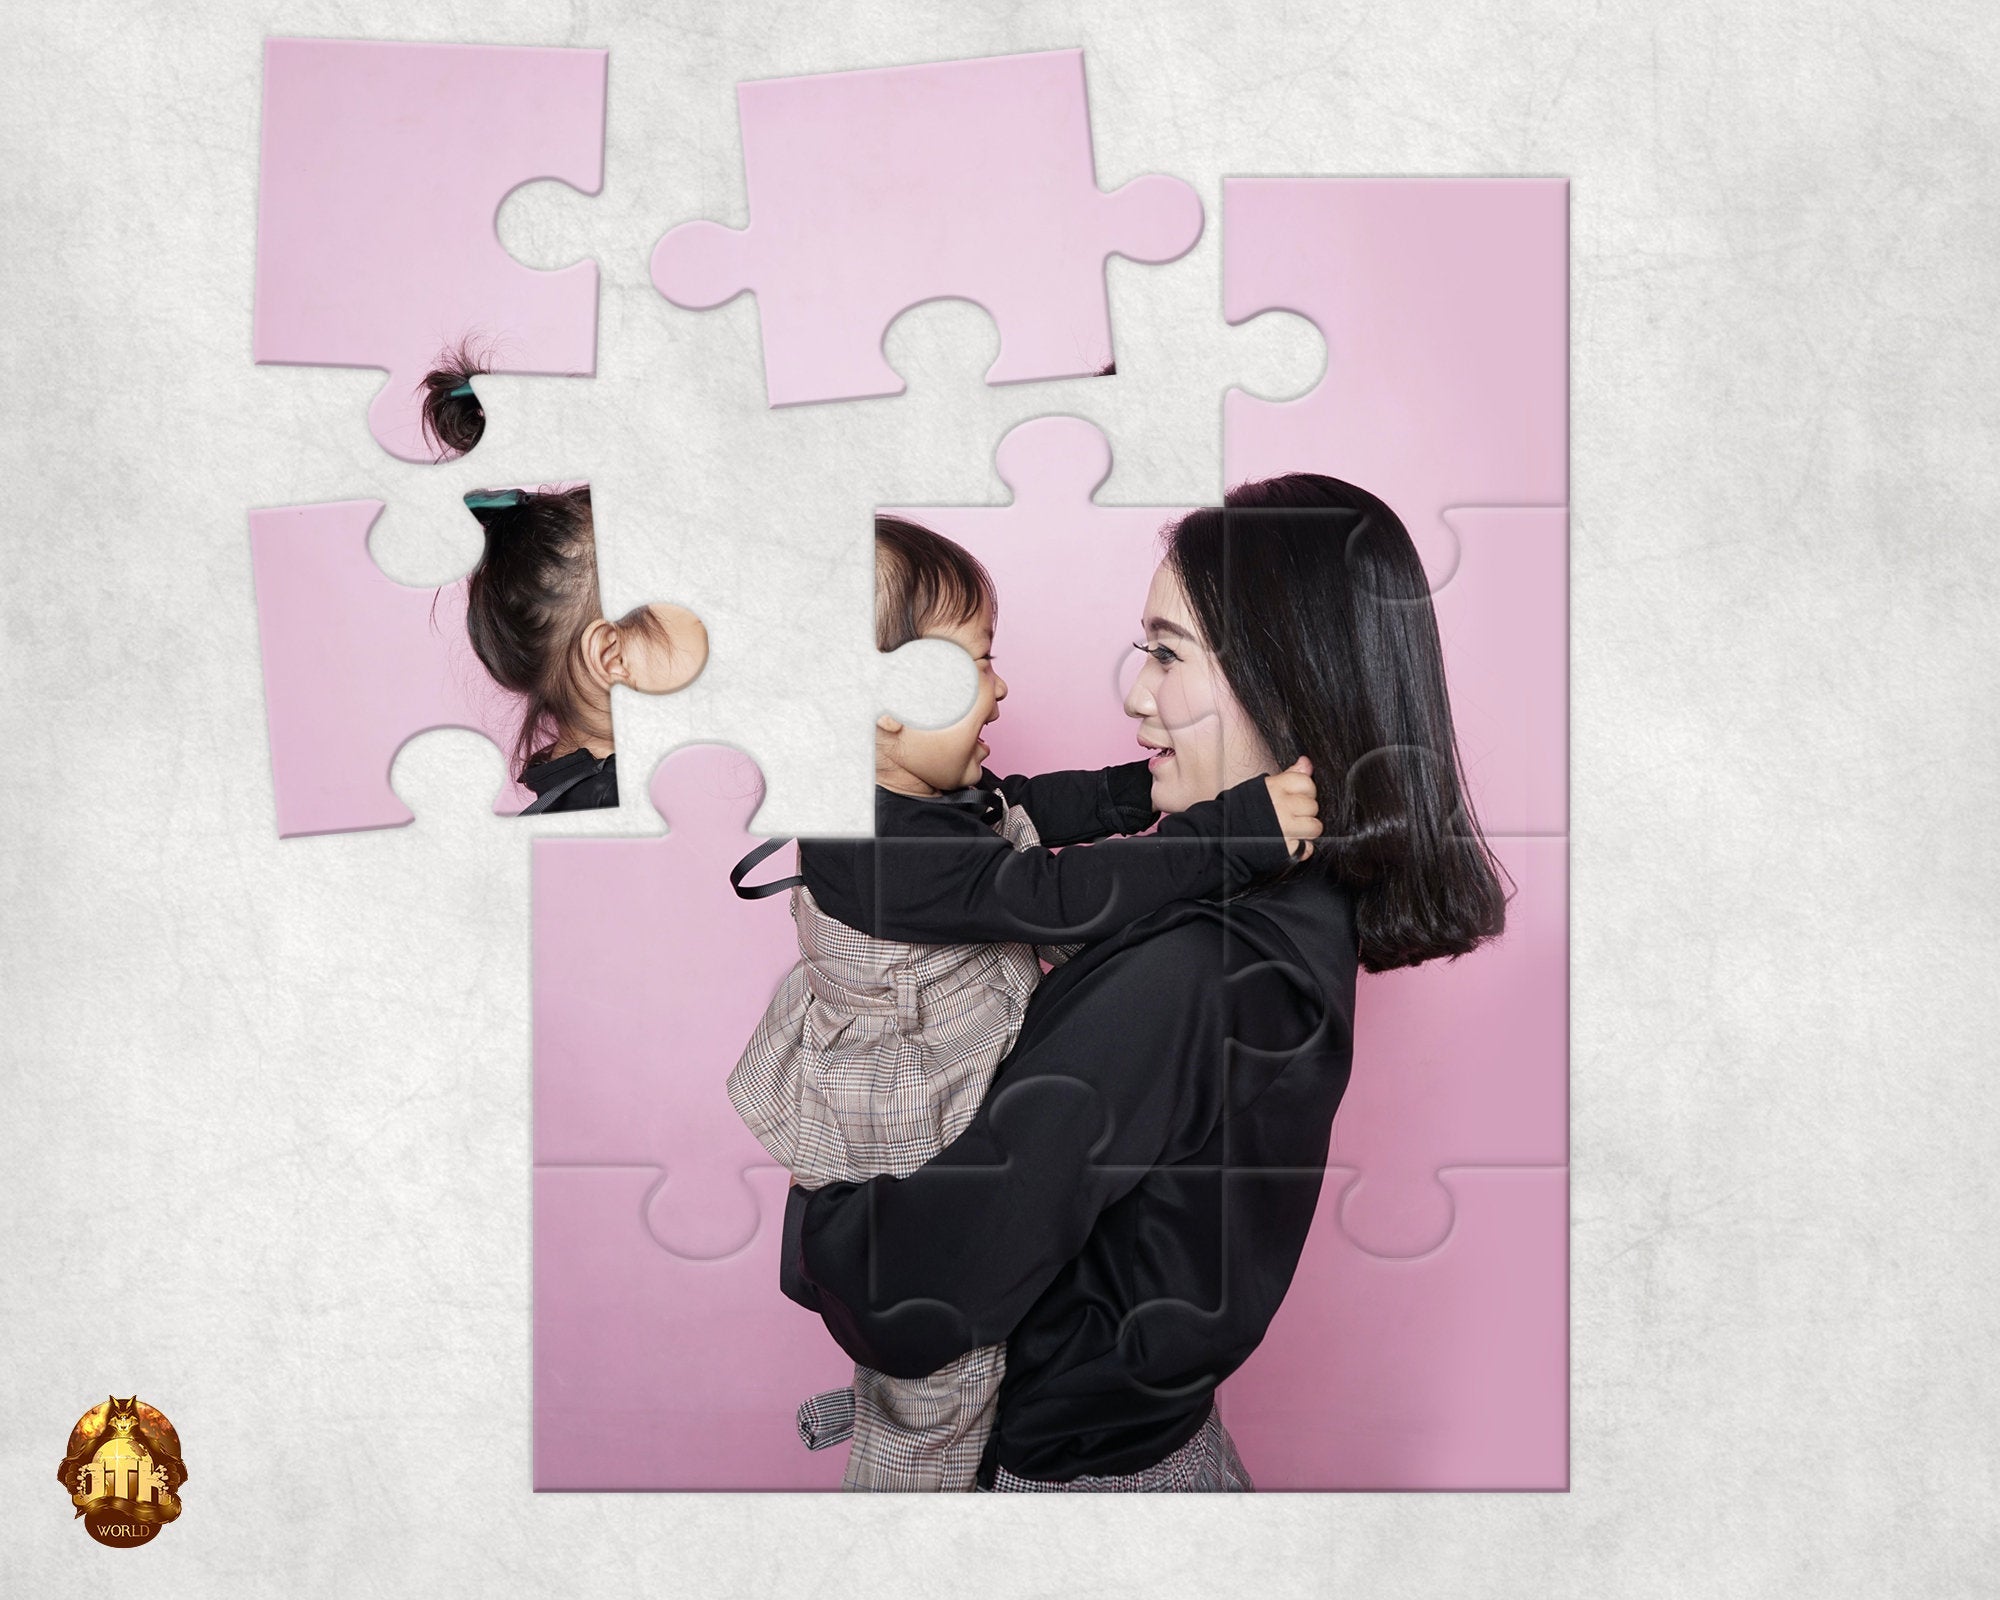 12 Piece Photo Puzzles - Personalized Picture Puzzle - Custom Valentines Photo Puzzle - 12 Piece Photo Jigsaw - Add Your Photo & Text